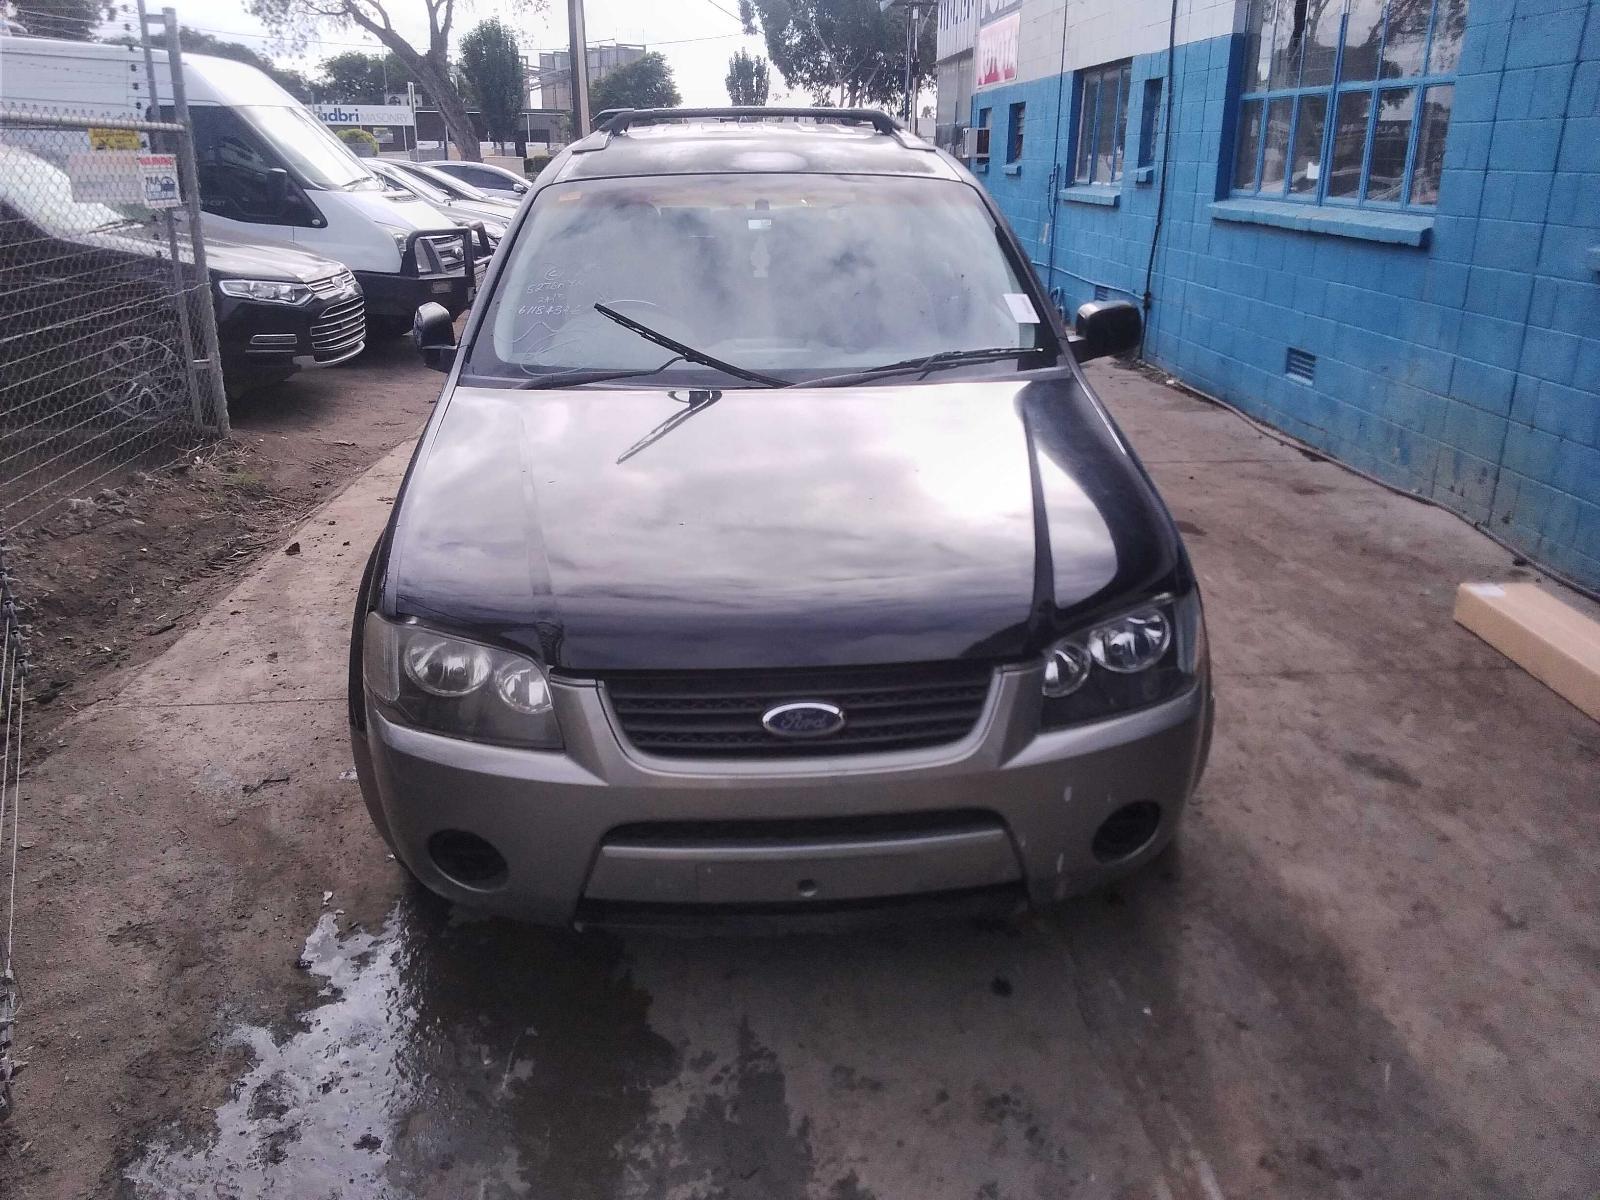 2007 SY FORD TERRITORY AWD PARTS